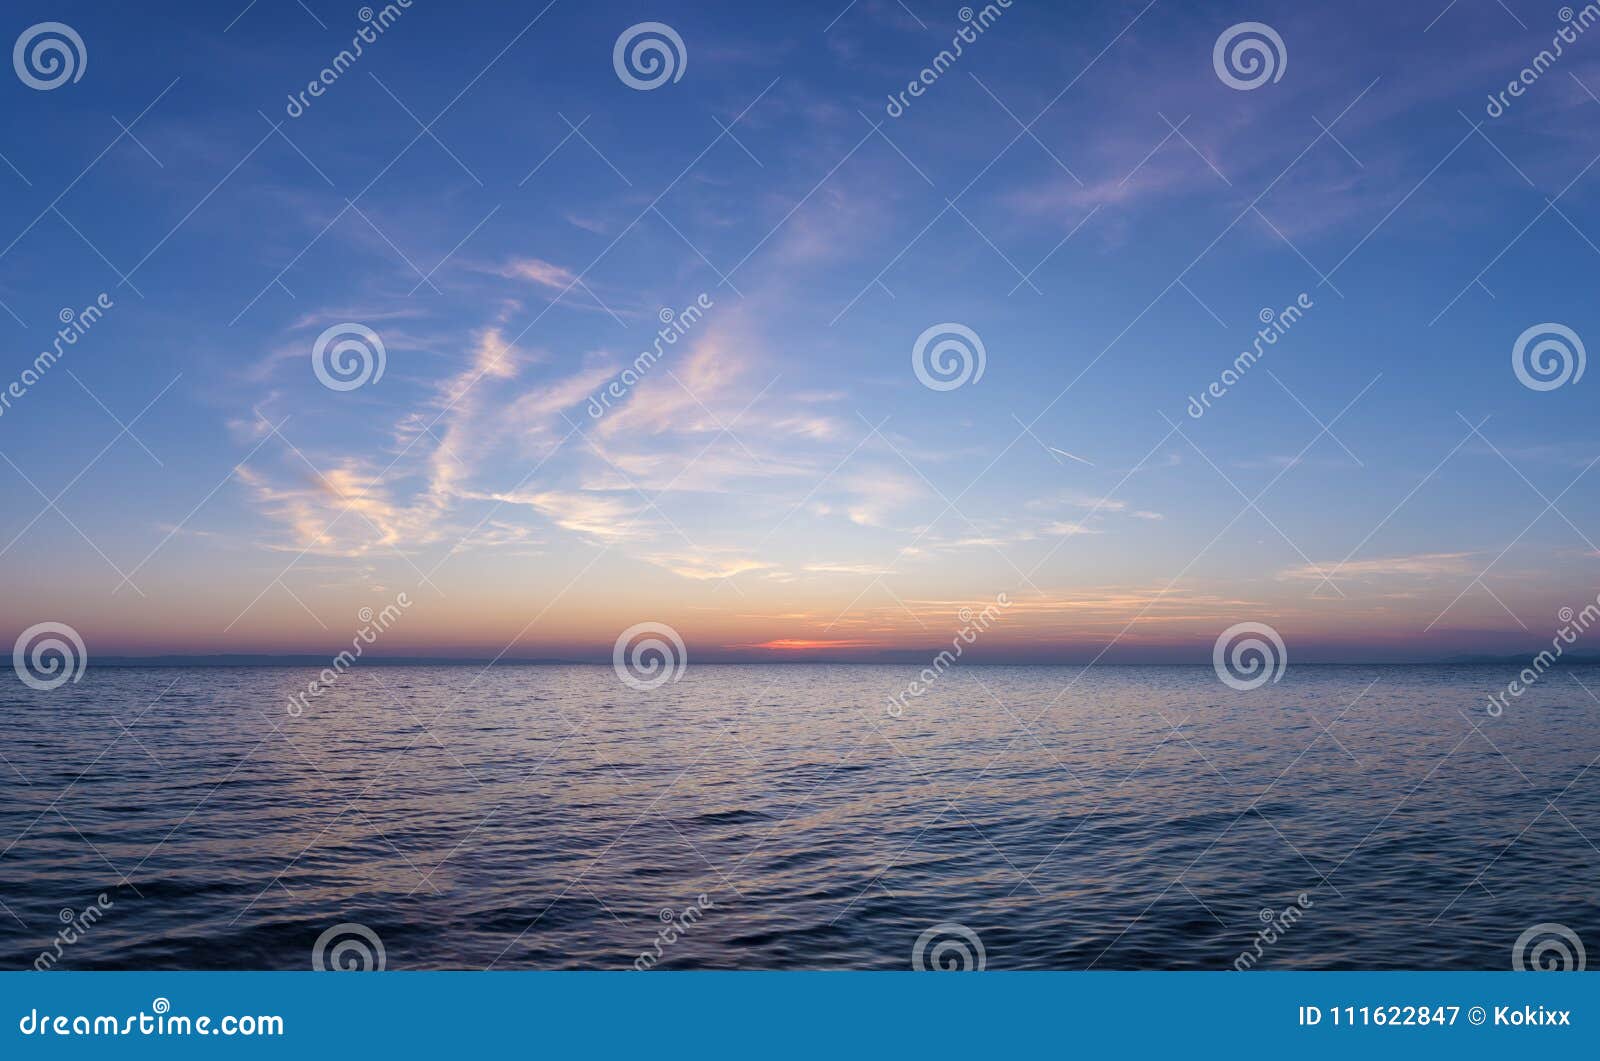 gorgeous sea and sky colors in the dusk, sithonia, chalkidiki, greece